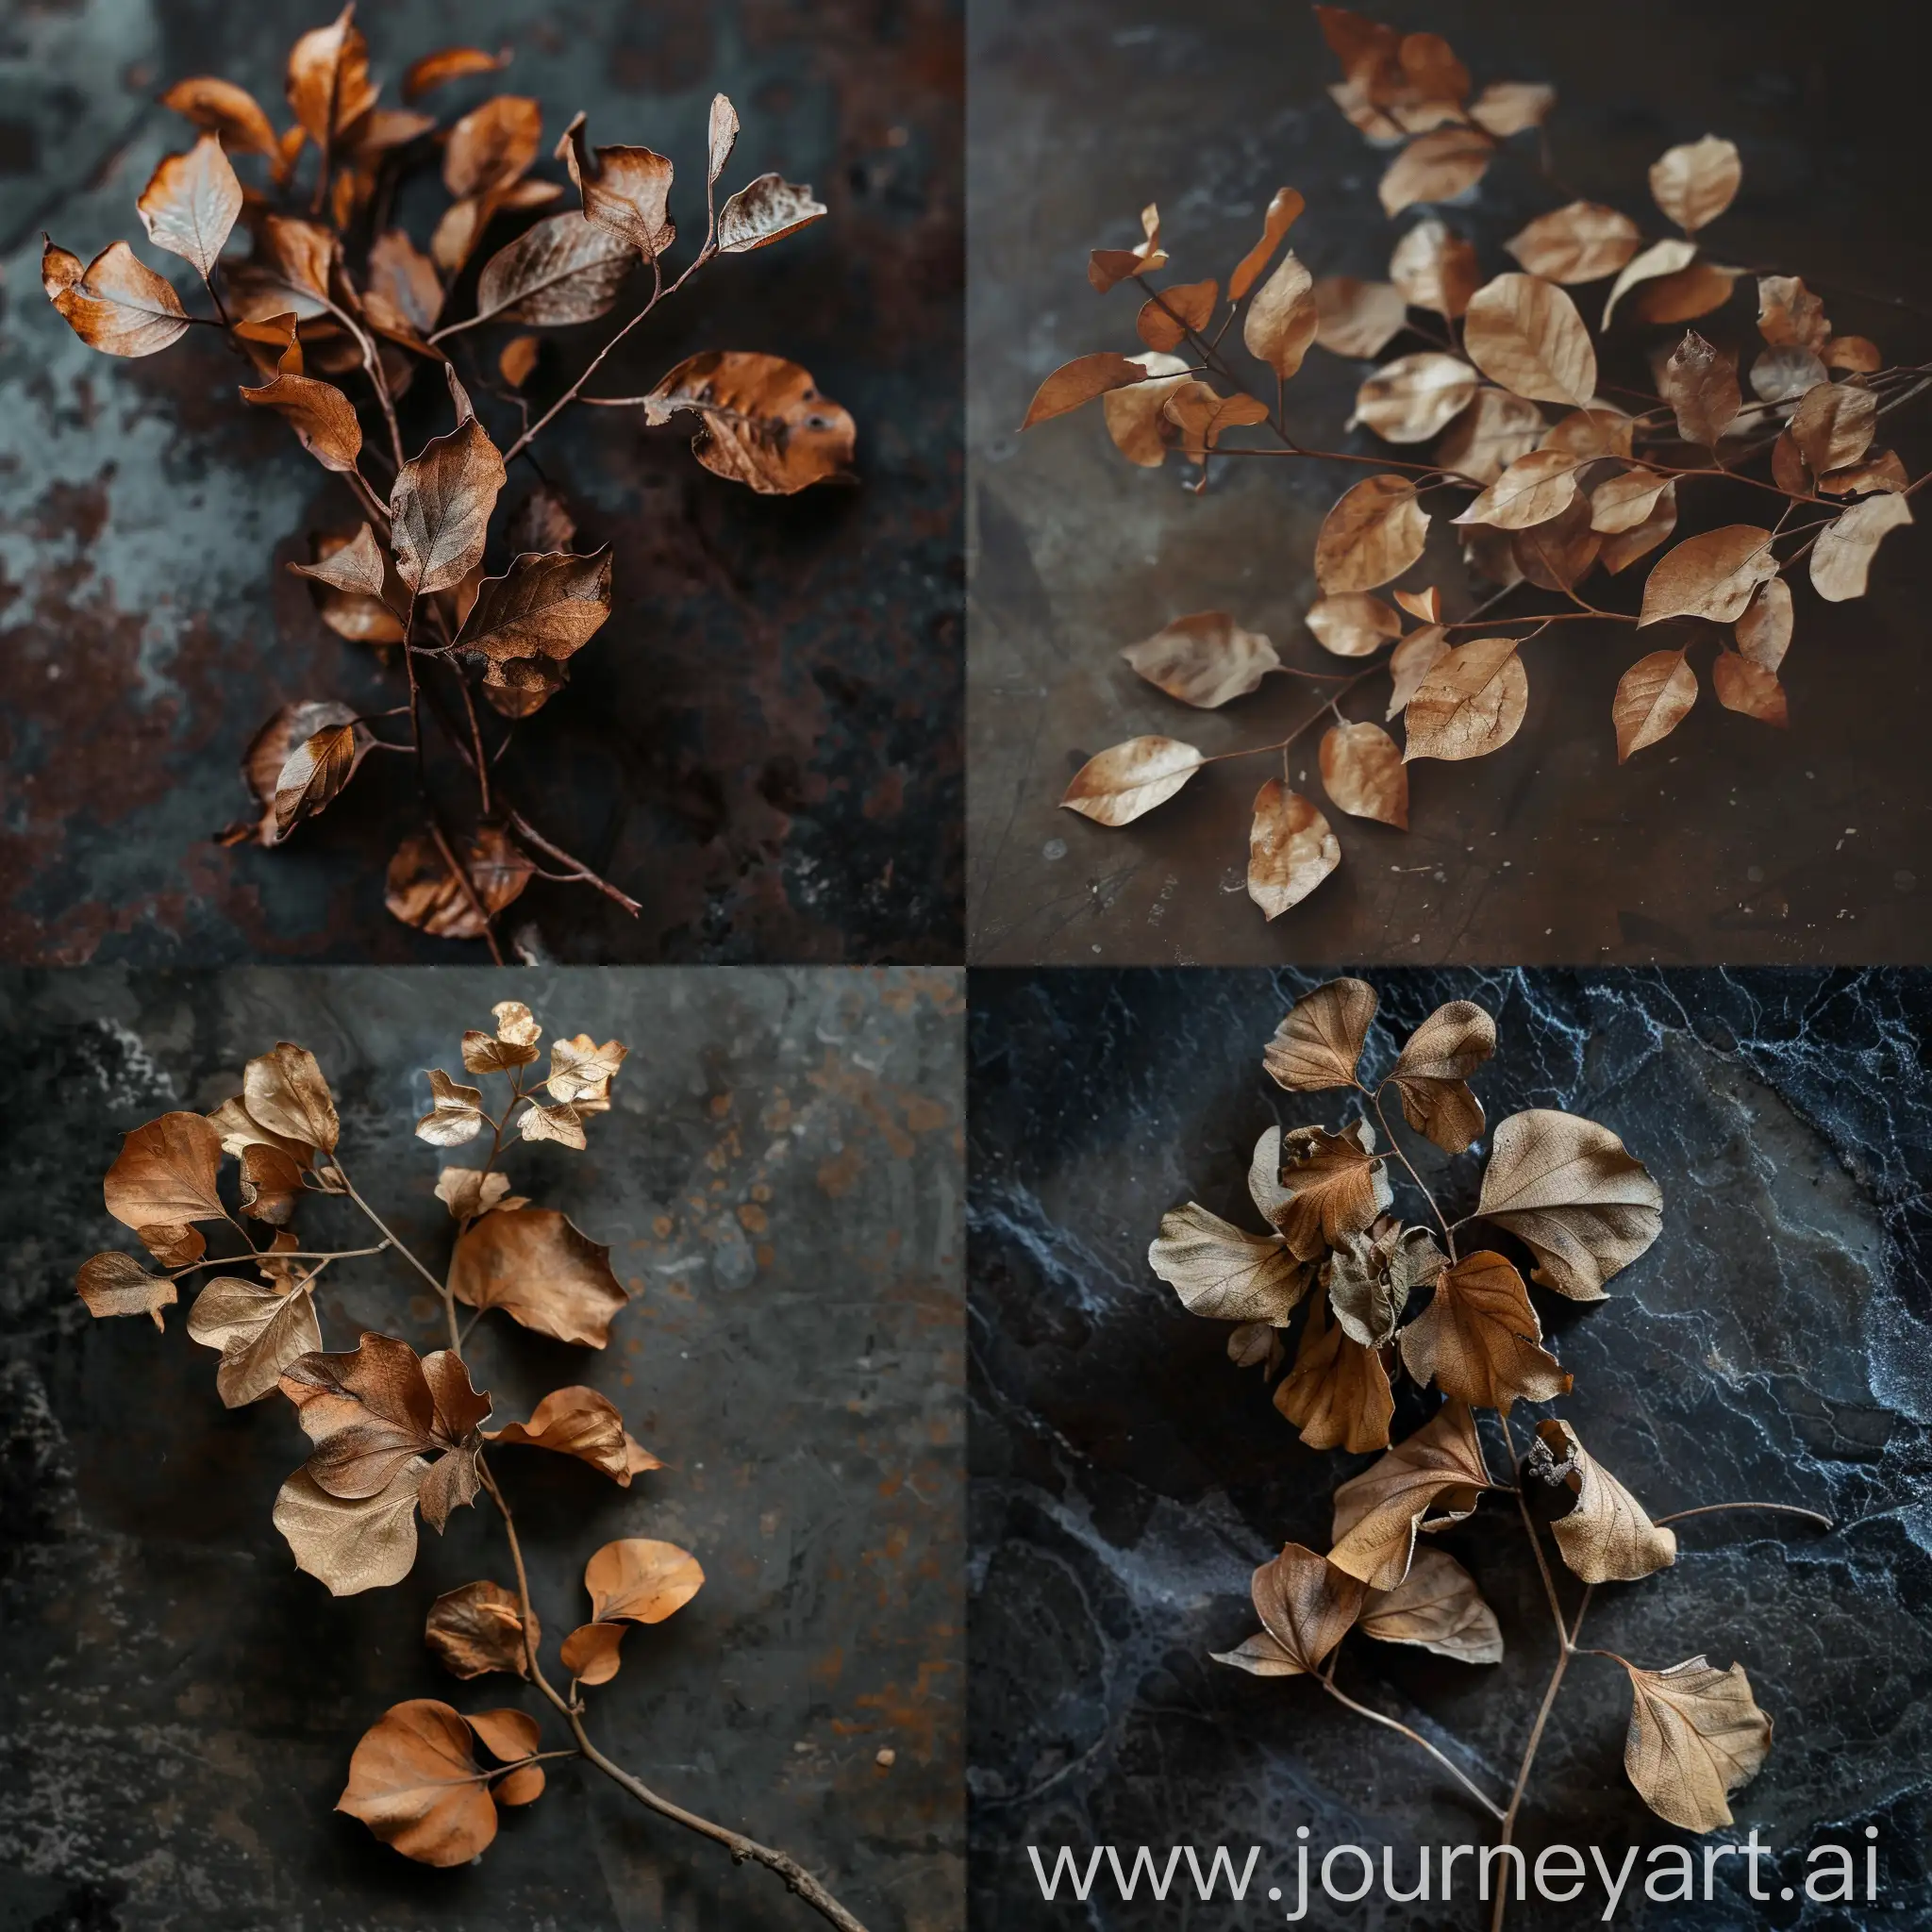 Dried-Plant-with-Brown-Leaves-on-Dark-Surface